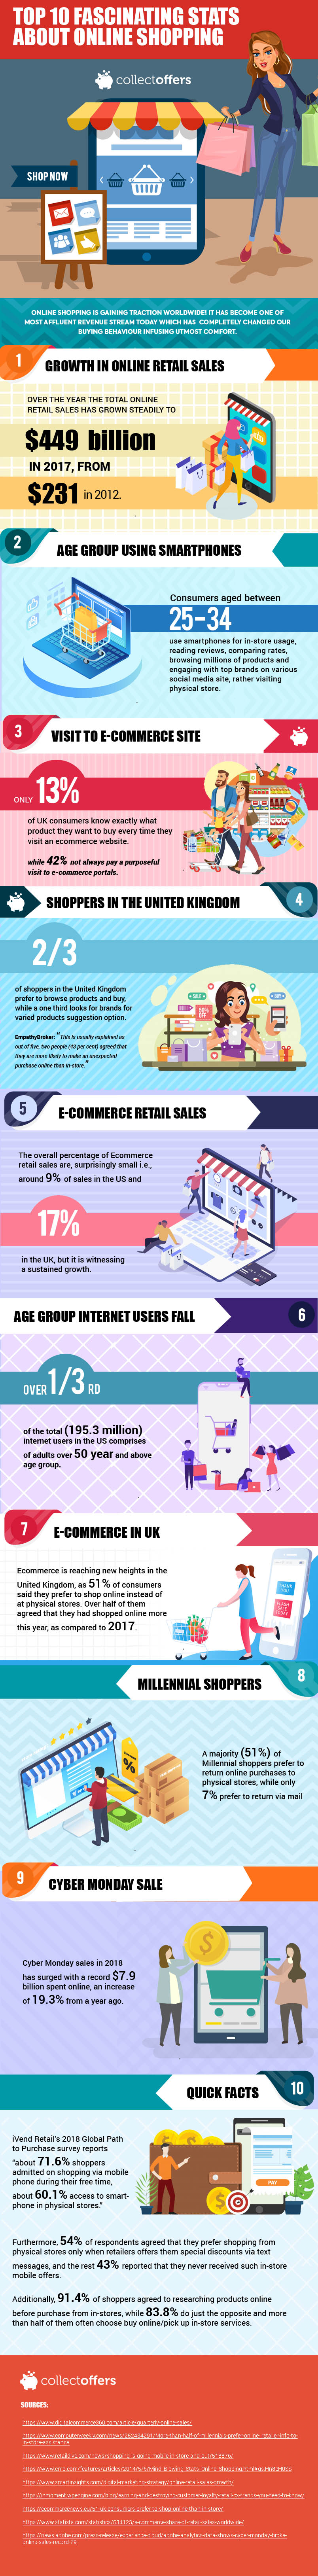 Top 10 Fascinating Stats About Online Shopping